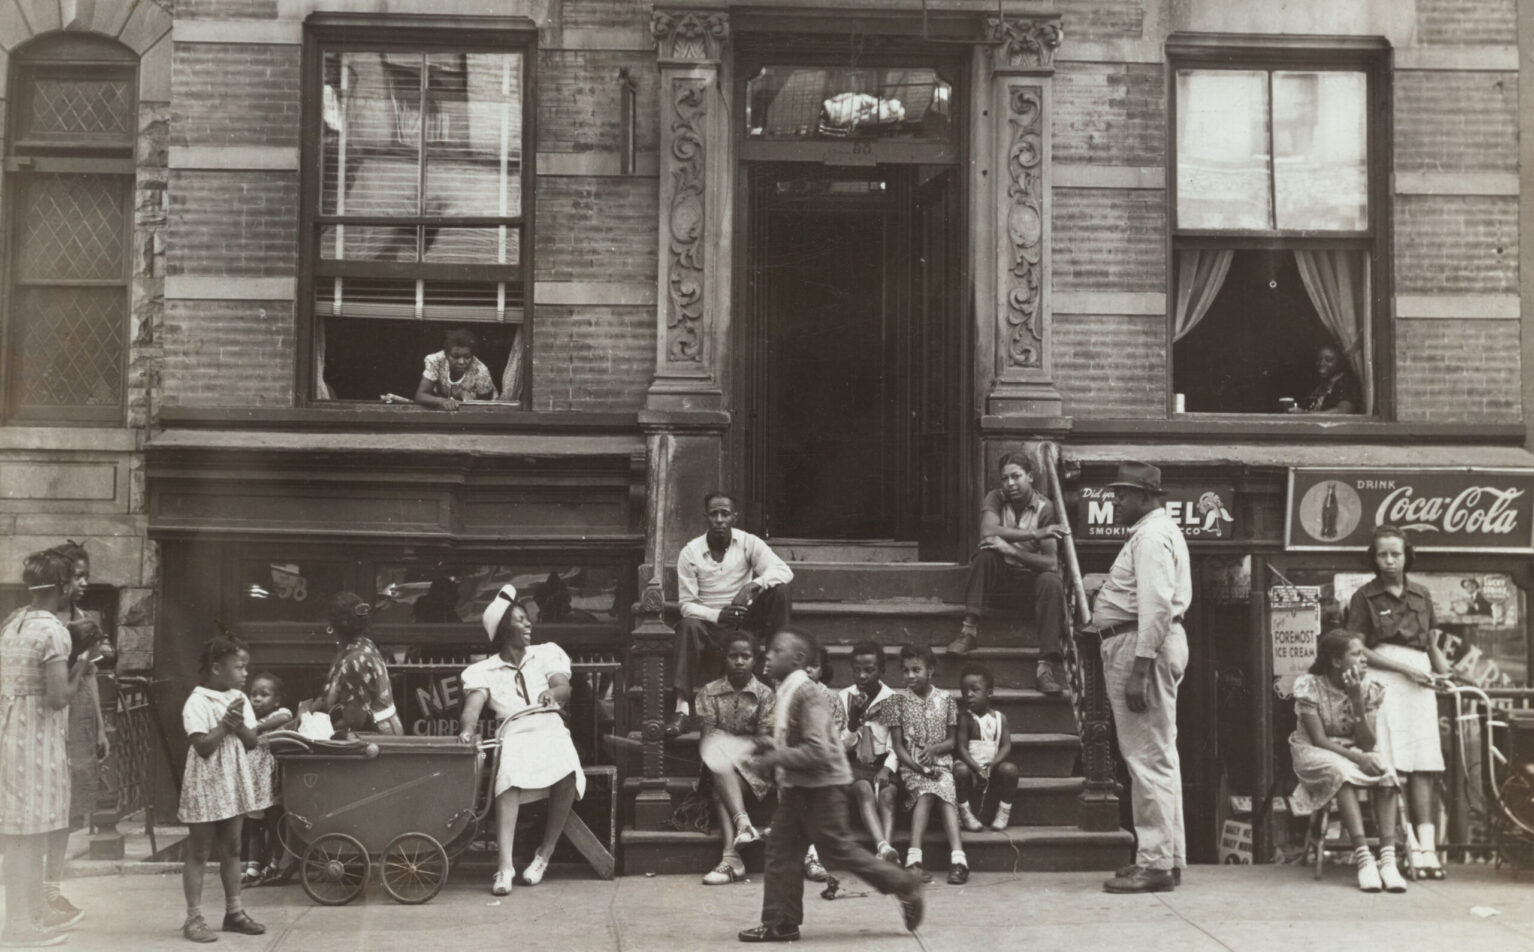 Harlem Tenement in Summer, 1939. Sid Grossman, WPA Federal Art Project. Schomburg Center for Research in Black Culture, Photographs and Prints Division, The New York Public Library.